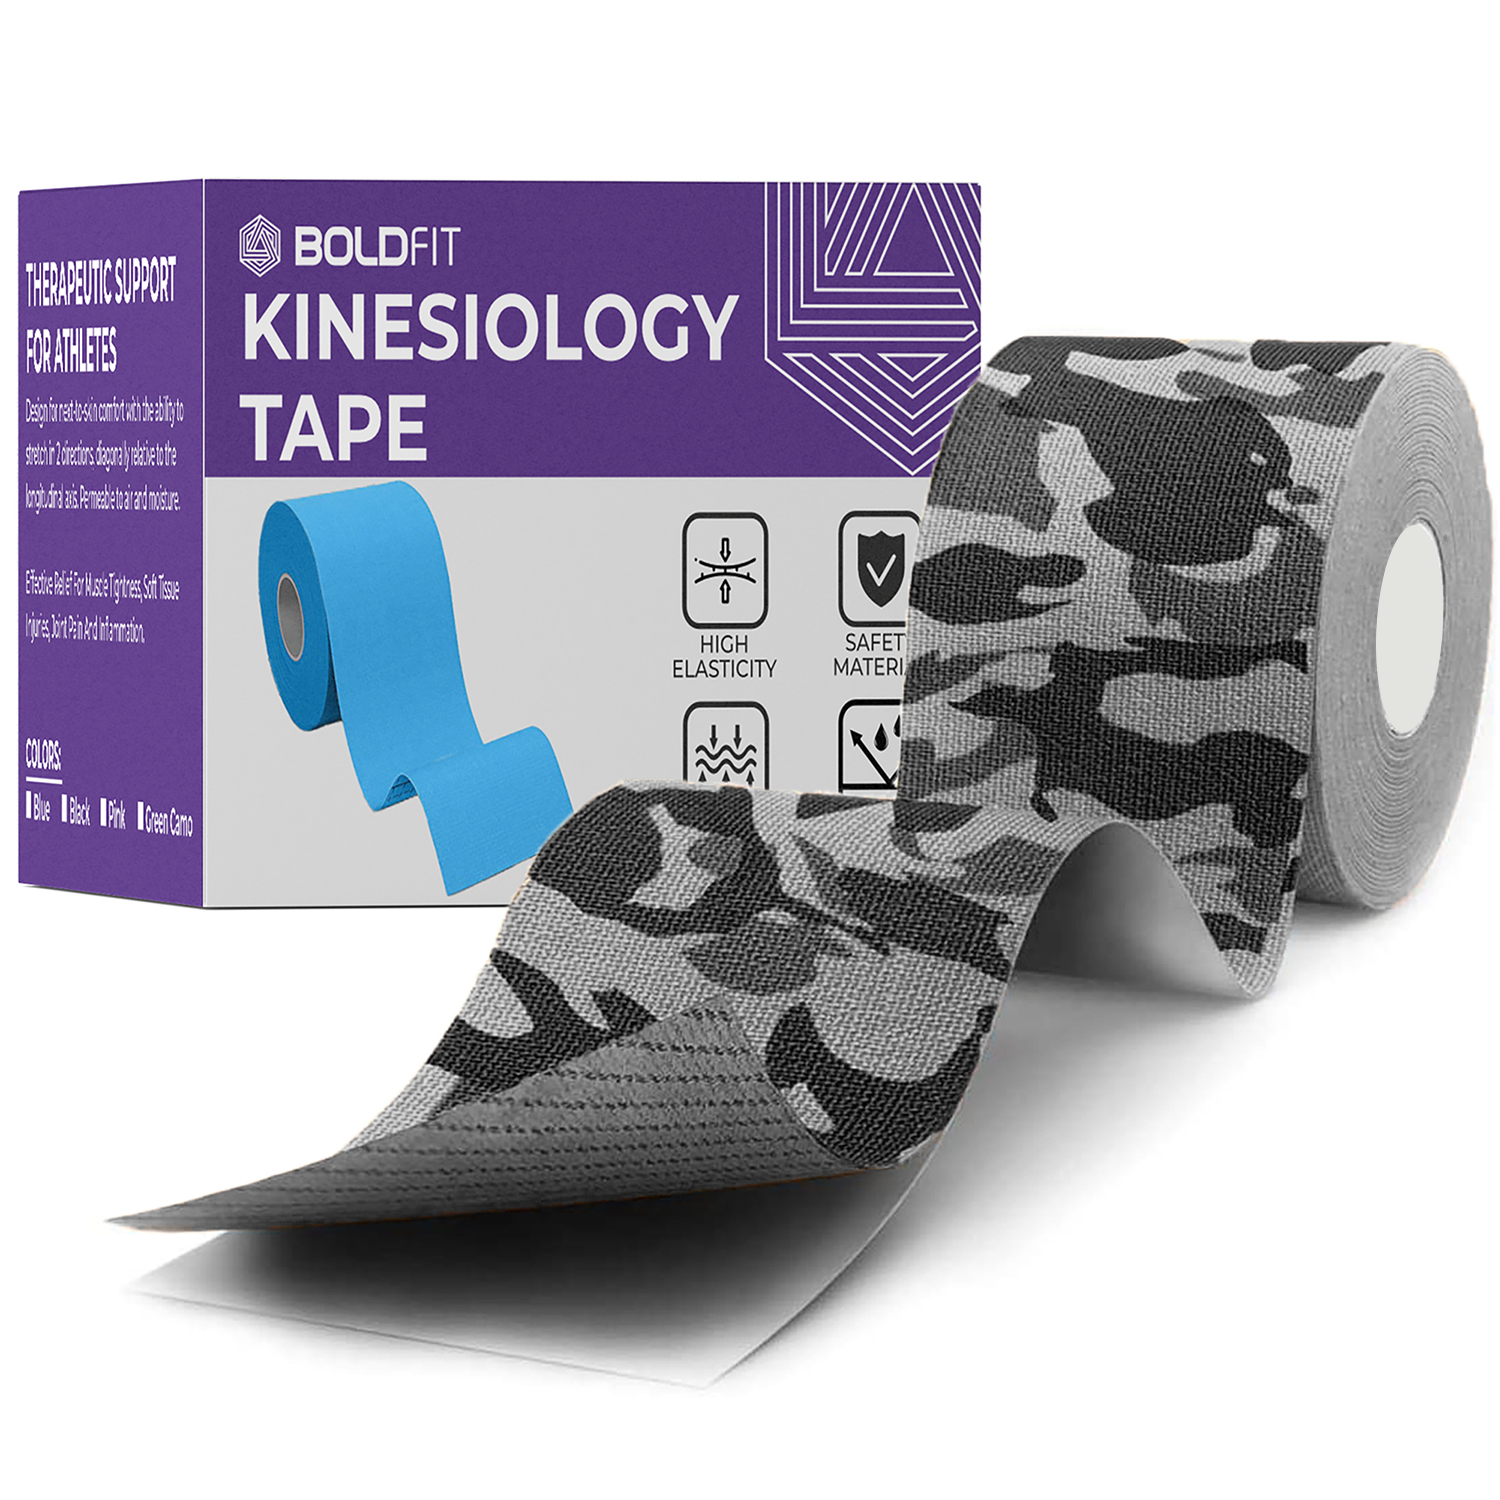 At adskille stille Effektivt Kinesiology Tape for Physiotherapy - BoldFit